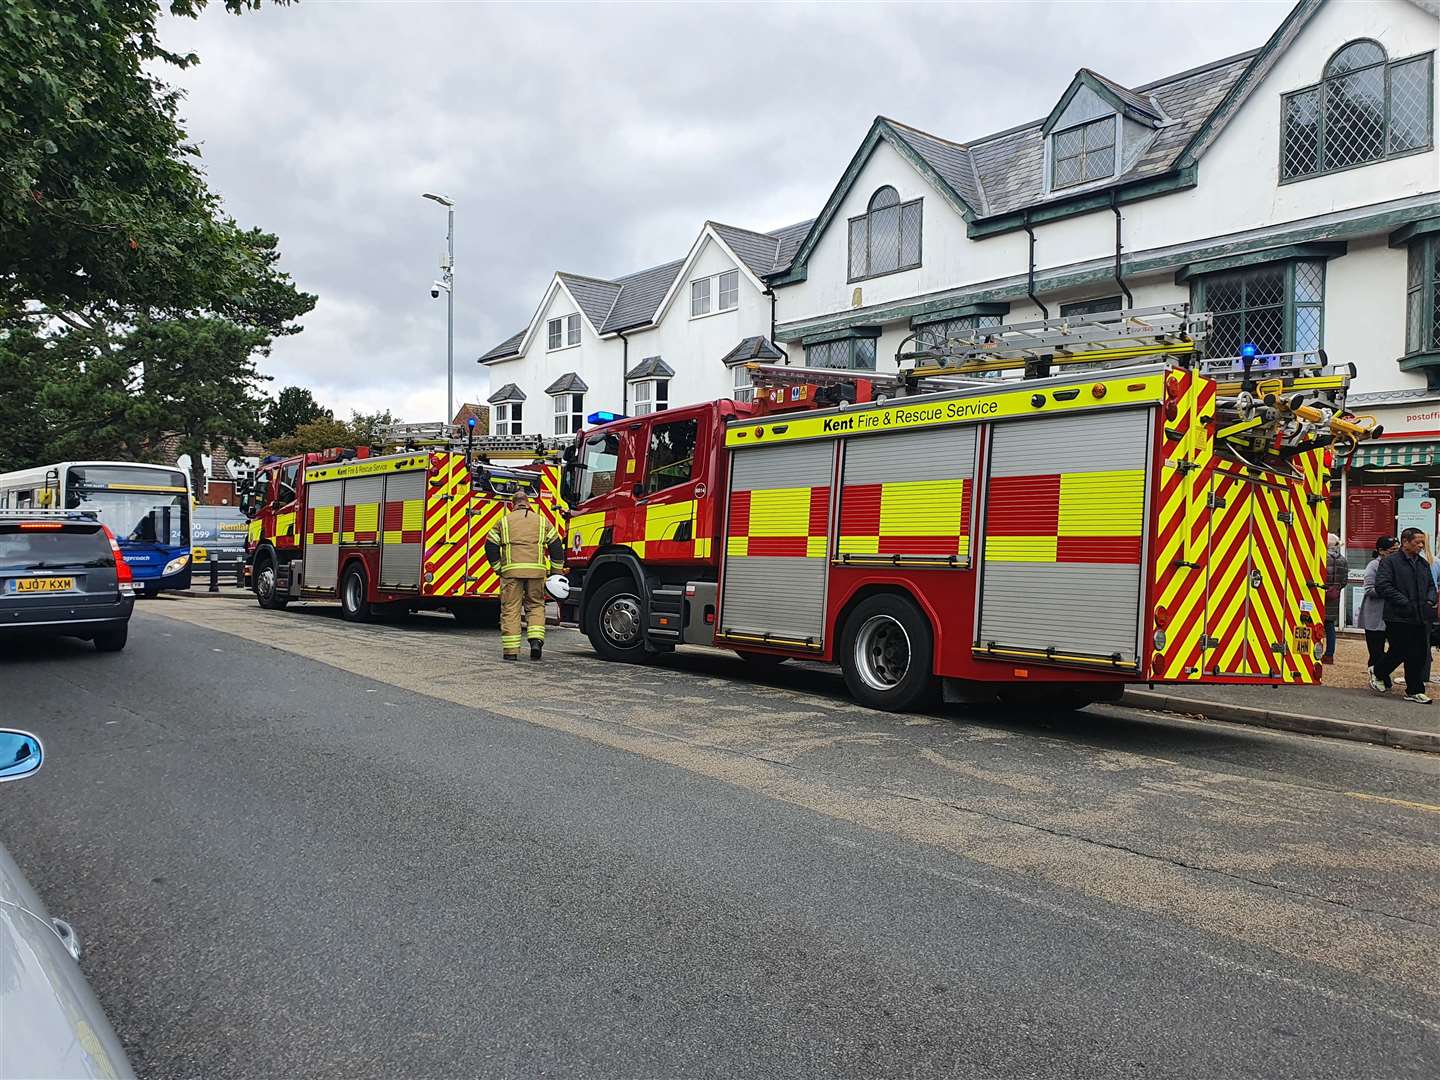 Fire engines were called to Paddy Power in Cheriton. Photo: Sean Axtell